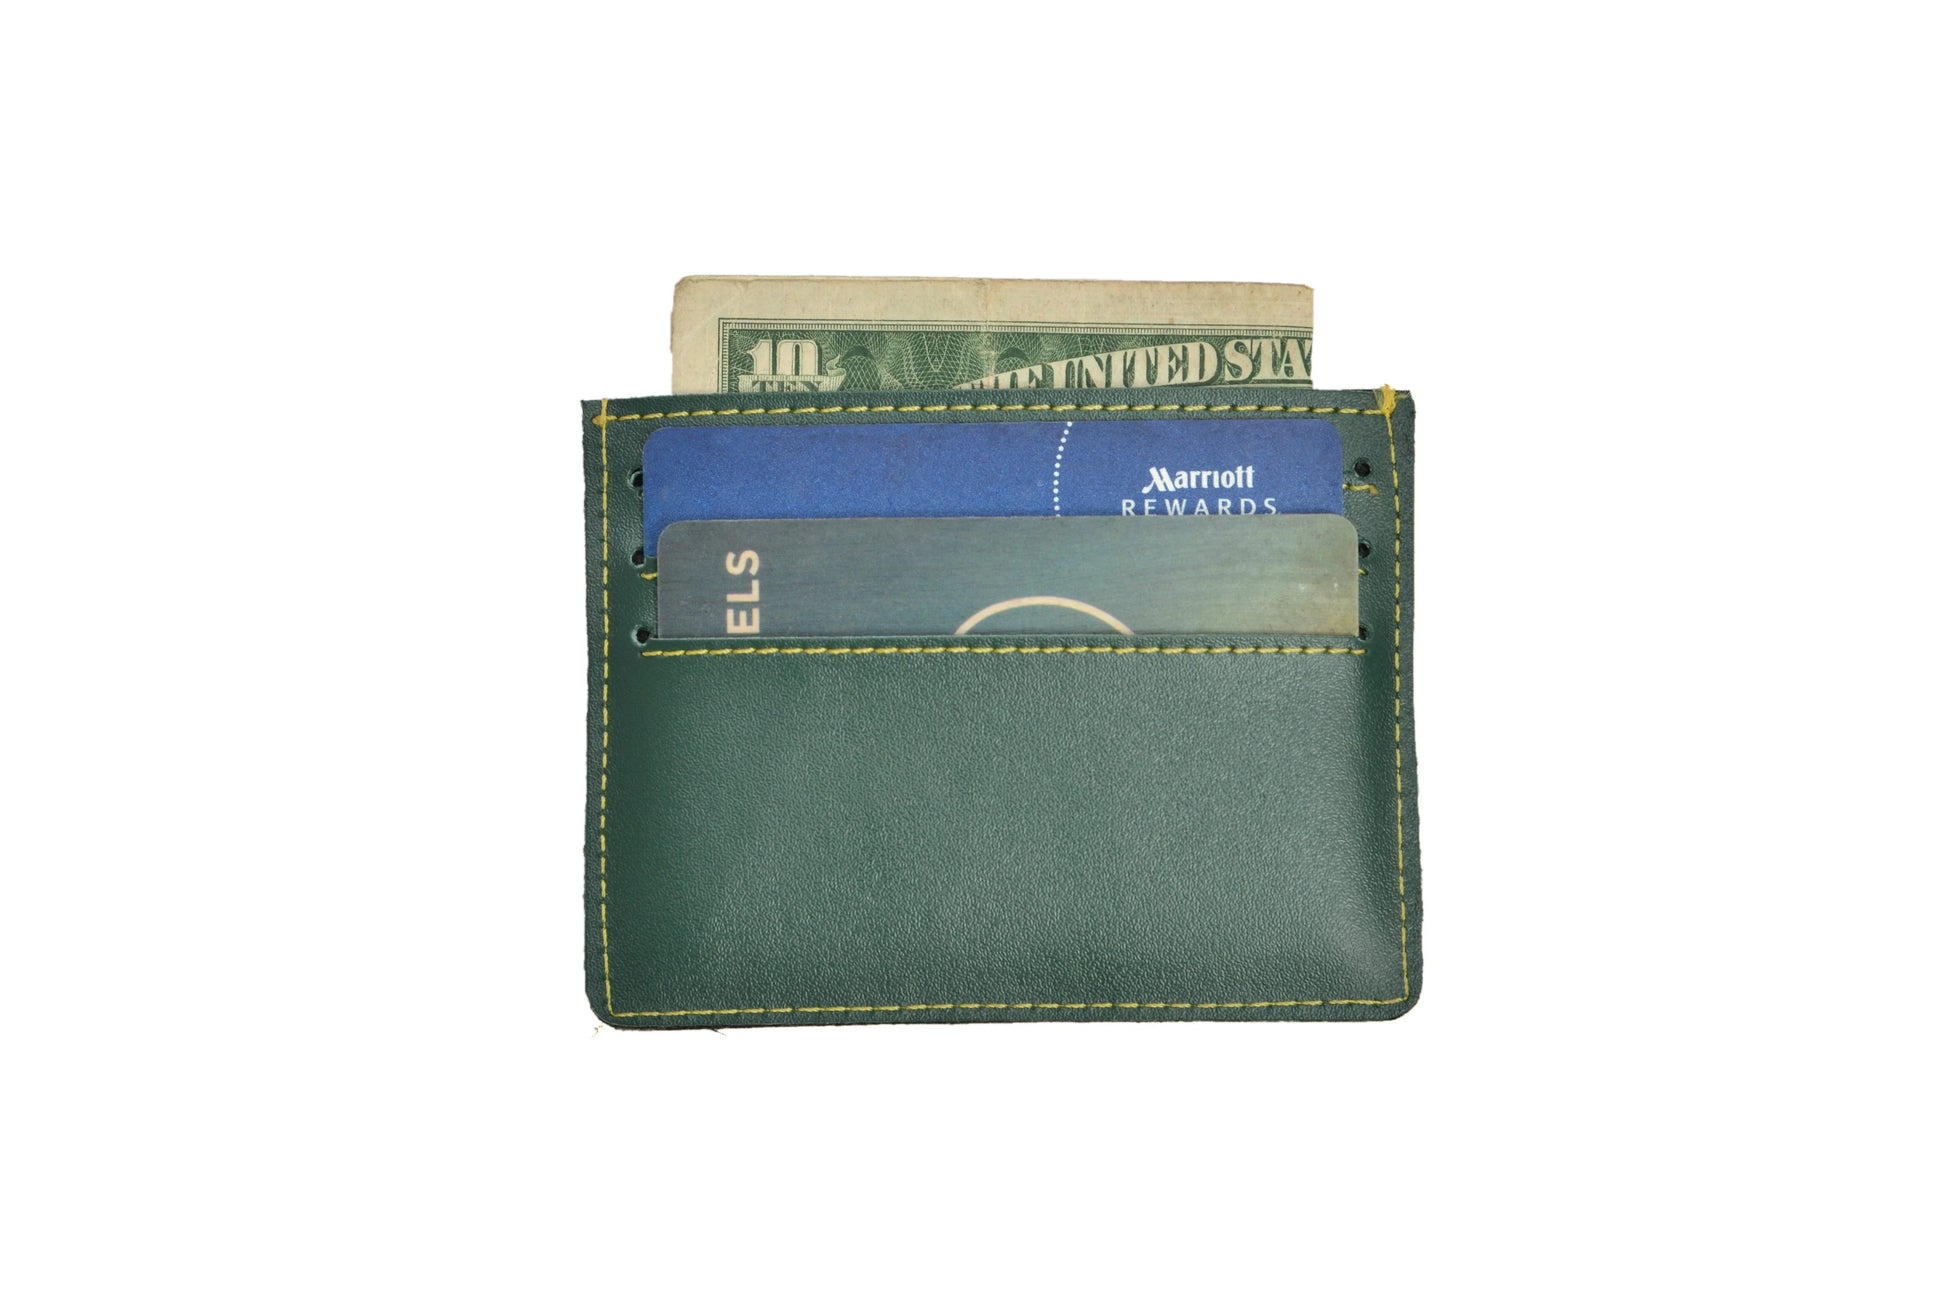 Our unisex card wallet is made with high-quality vegan leather, making it a durable and eco-friendly accessory.